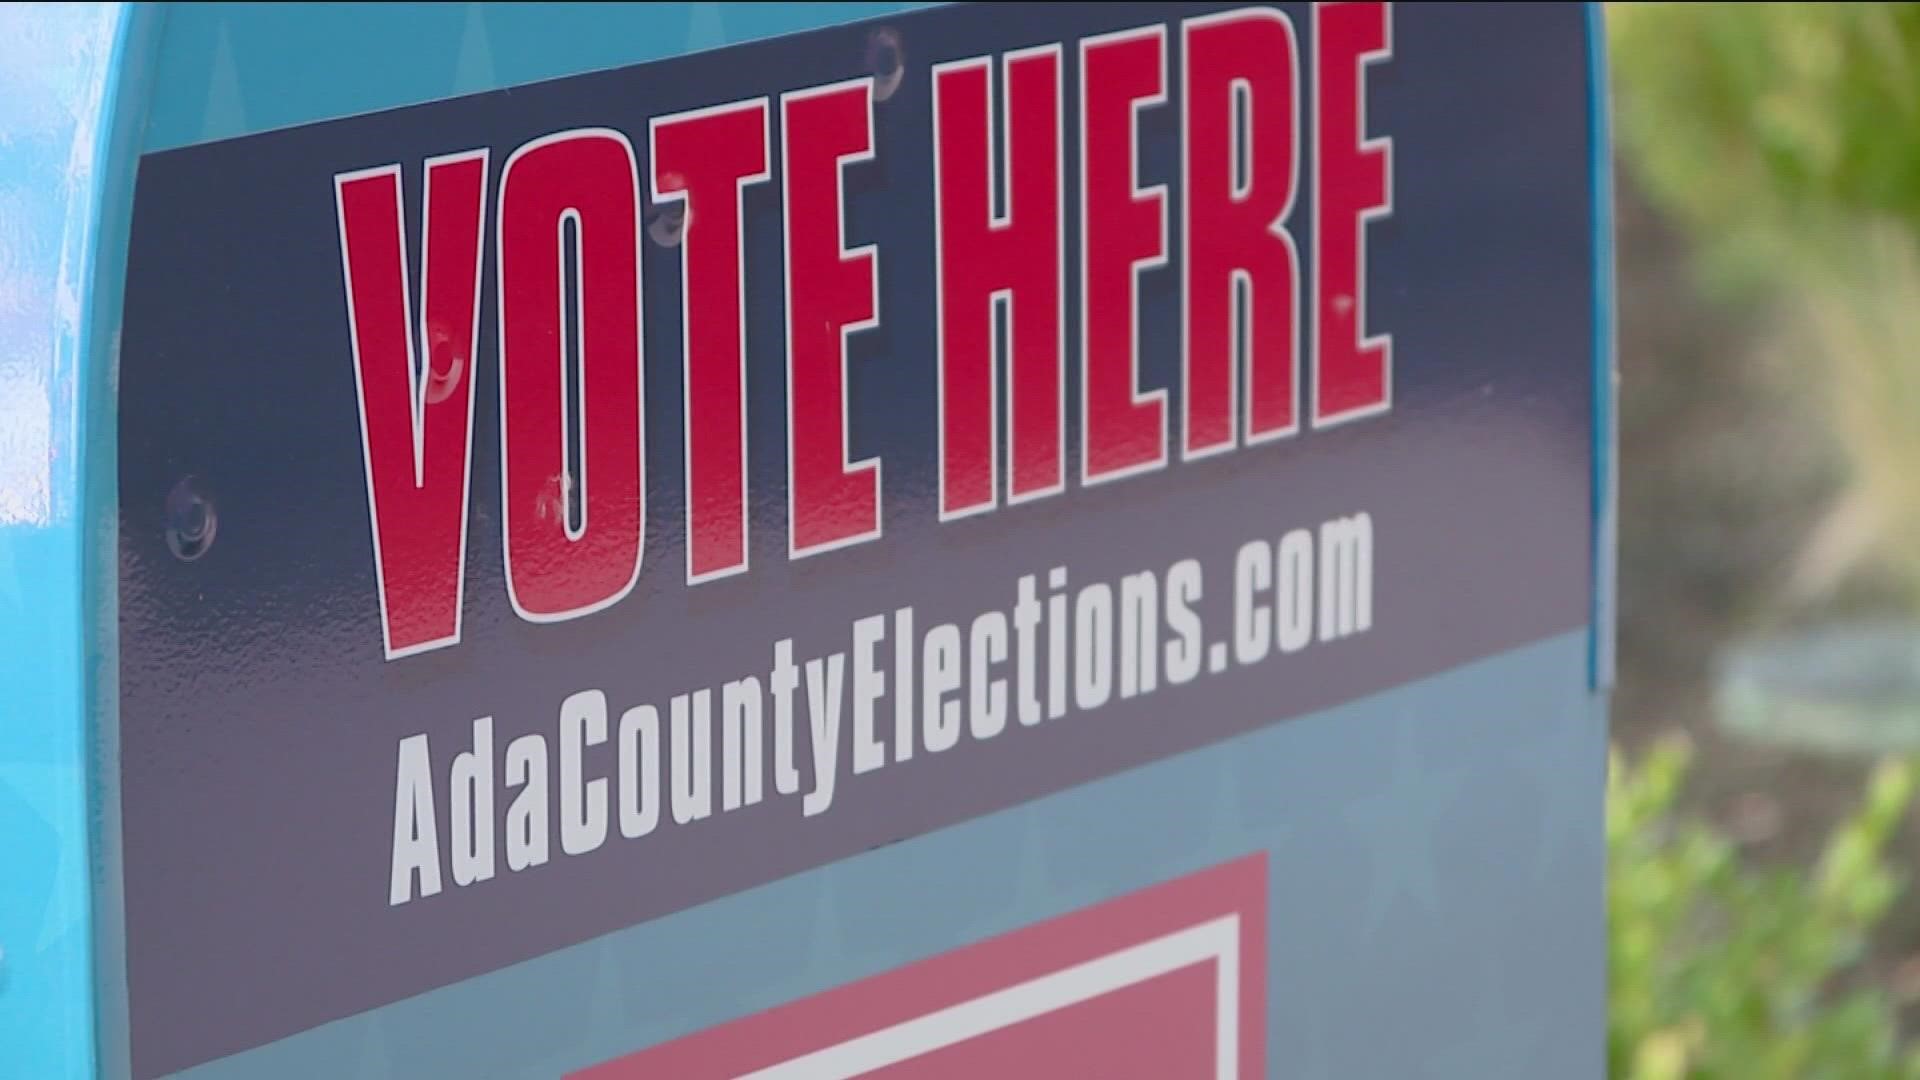 Ada County elections began sending out ballots to voters Friday. If you requested one, you should see it in the mail the week of Sept. 26th.